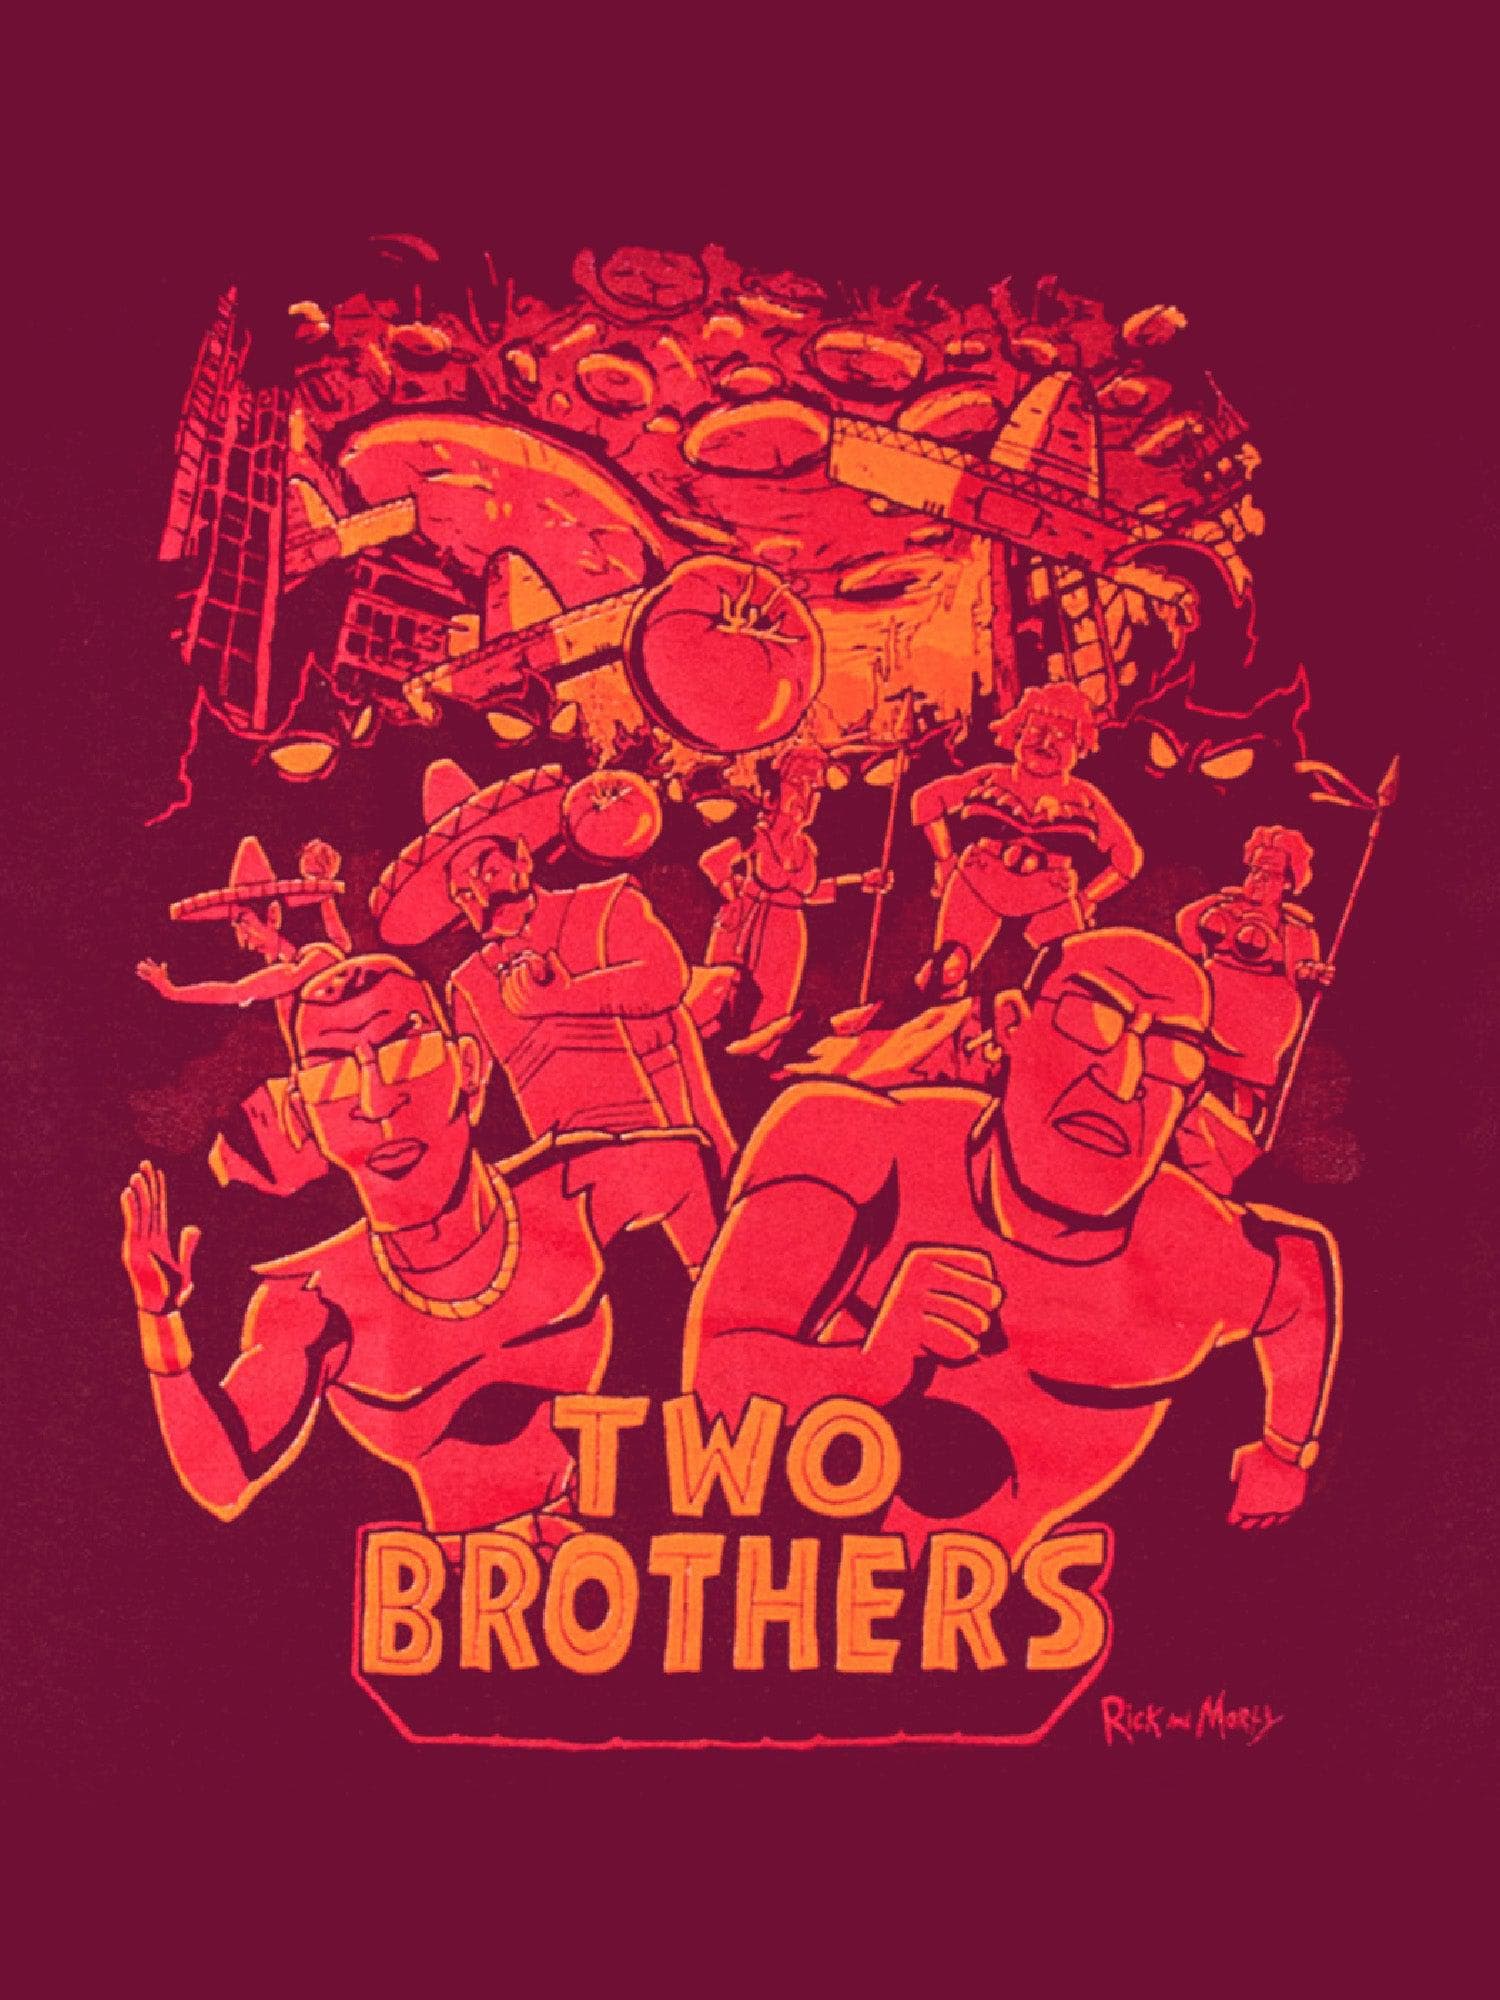 Rick and Morty "Two Brothers" T-Shirt - costumes.com